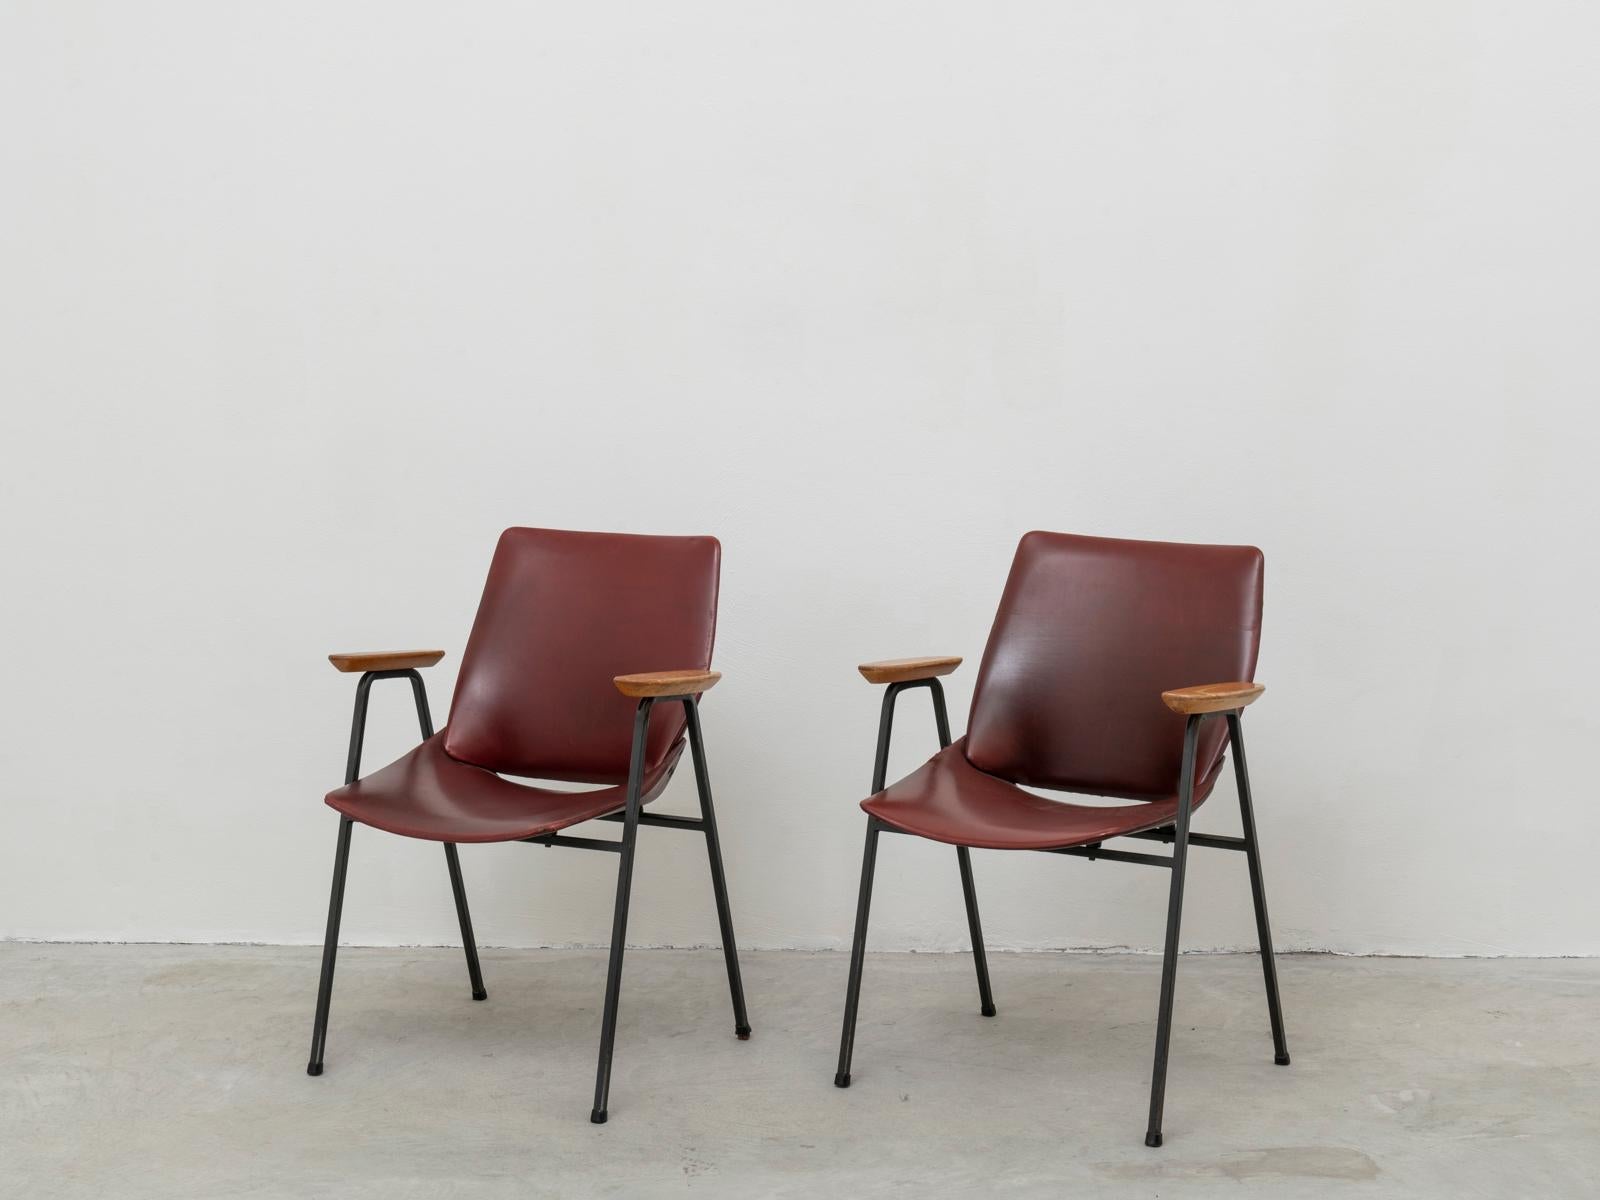 Pair of Mid-Century Modern armchairs were designed by Slovenian architect Niko Kralj. They were produced by the company Stol Kamnik from 1957. This pair is from circa 1960 and still features the original dark-cherry leatherette upholstering and